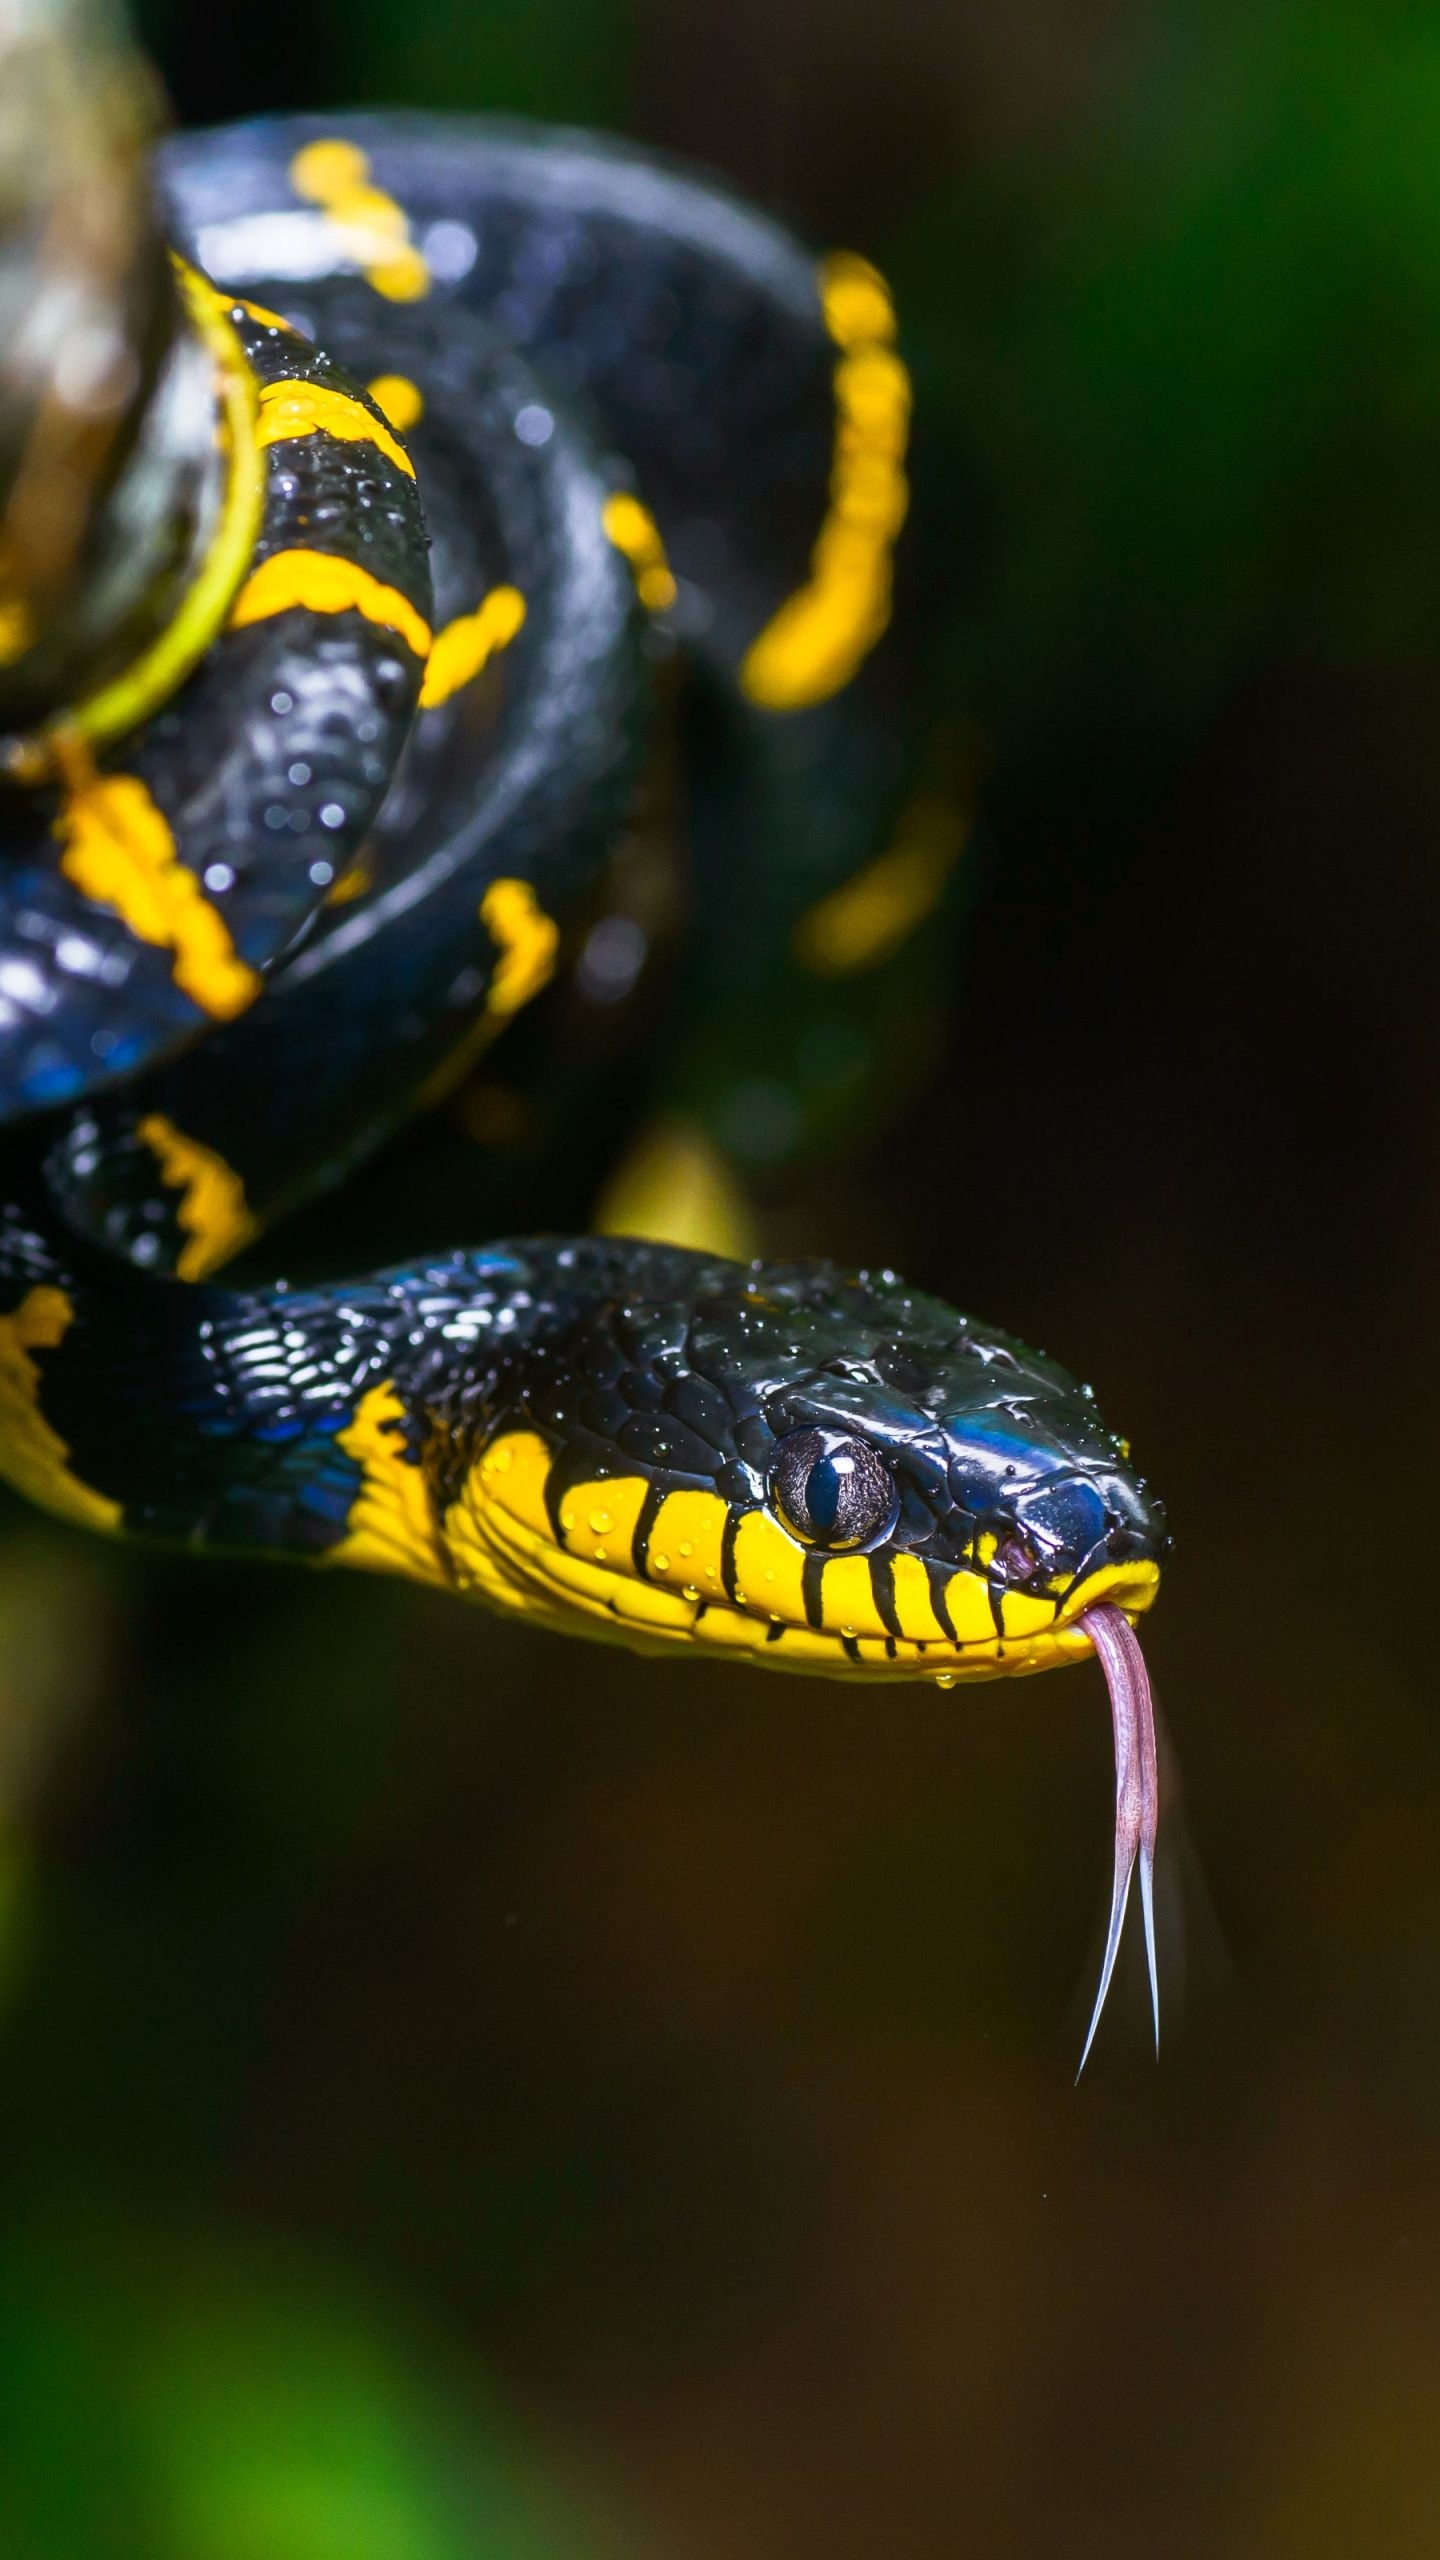 Ultra HD snakes, Reptile wallpapers, 4K serpent images, Stunning reptiles, 1440x2560 HD Handy